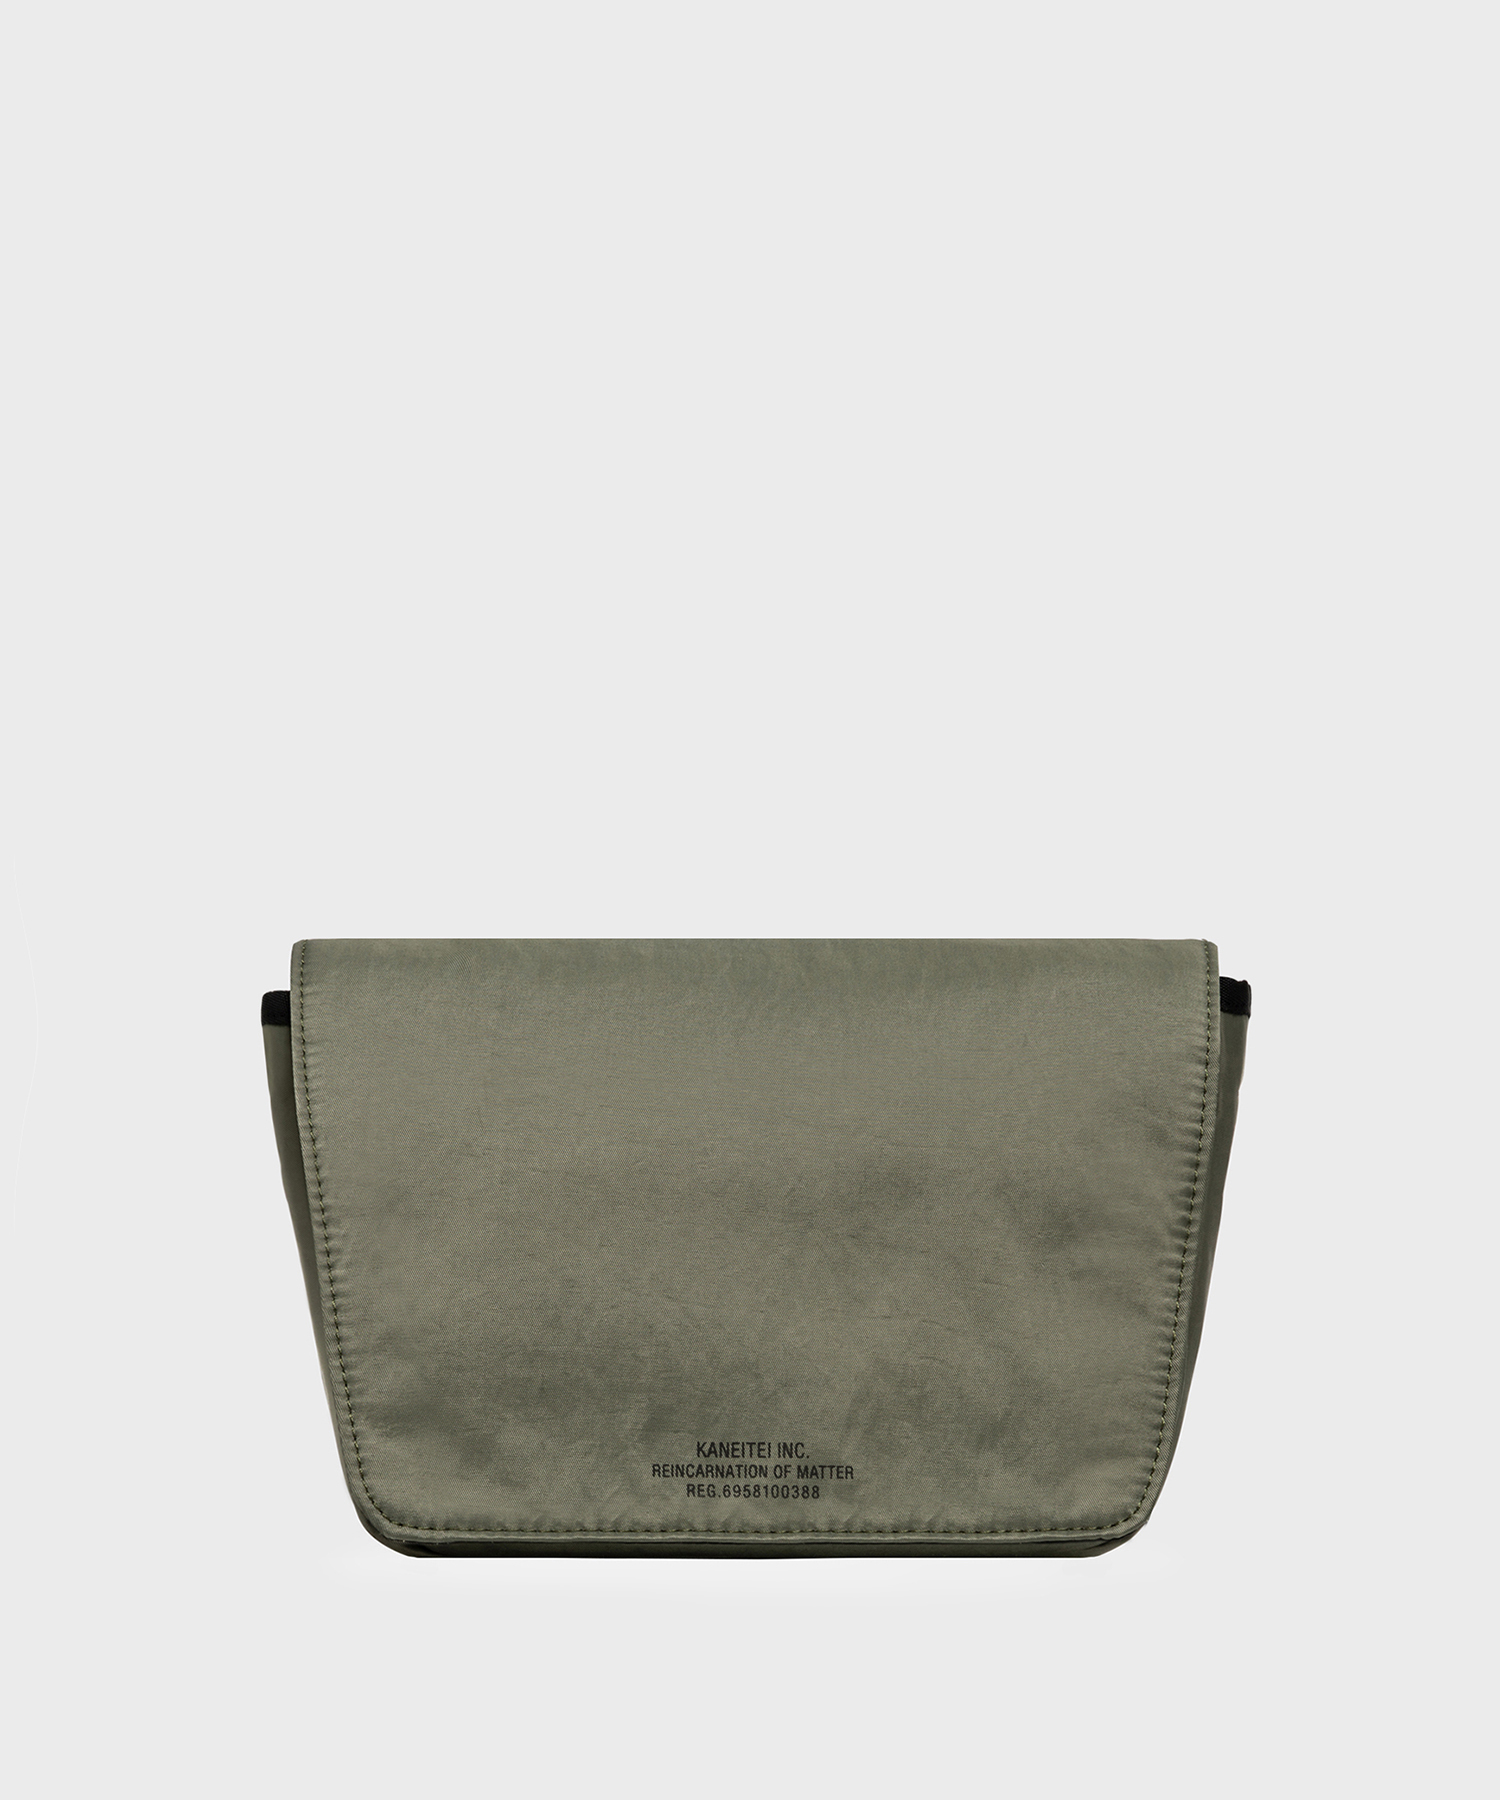 CHICAGO MESSENGER BAG S (OLIVE DRAB) / RECYCLED